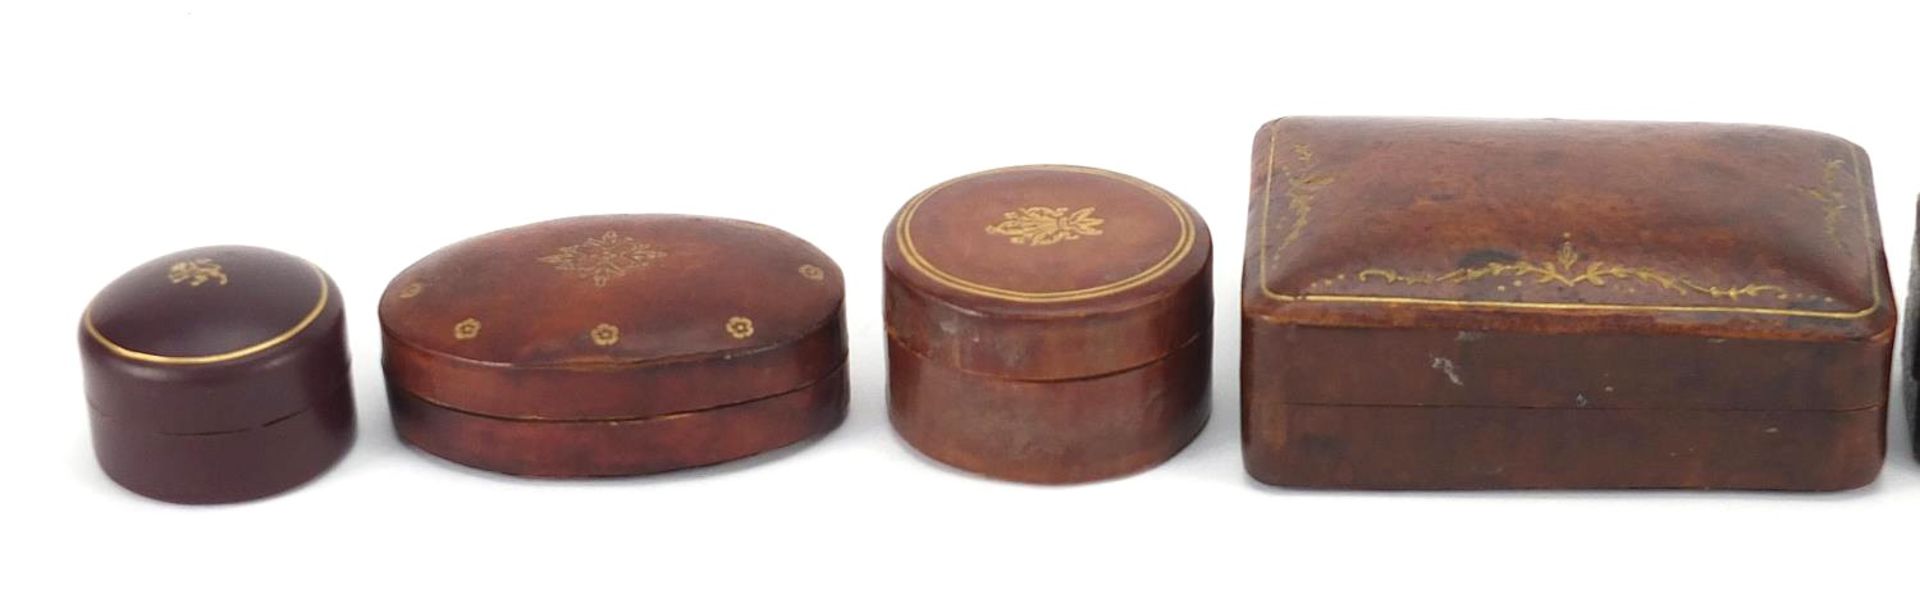 Jewellery boxes including ring boxes and Italian tooled leather, the largest 10cm wide - Image 2 of 5